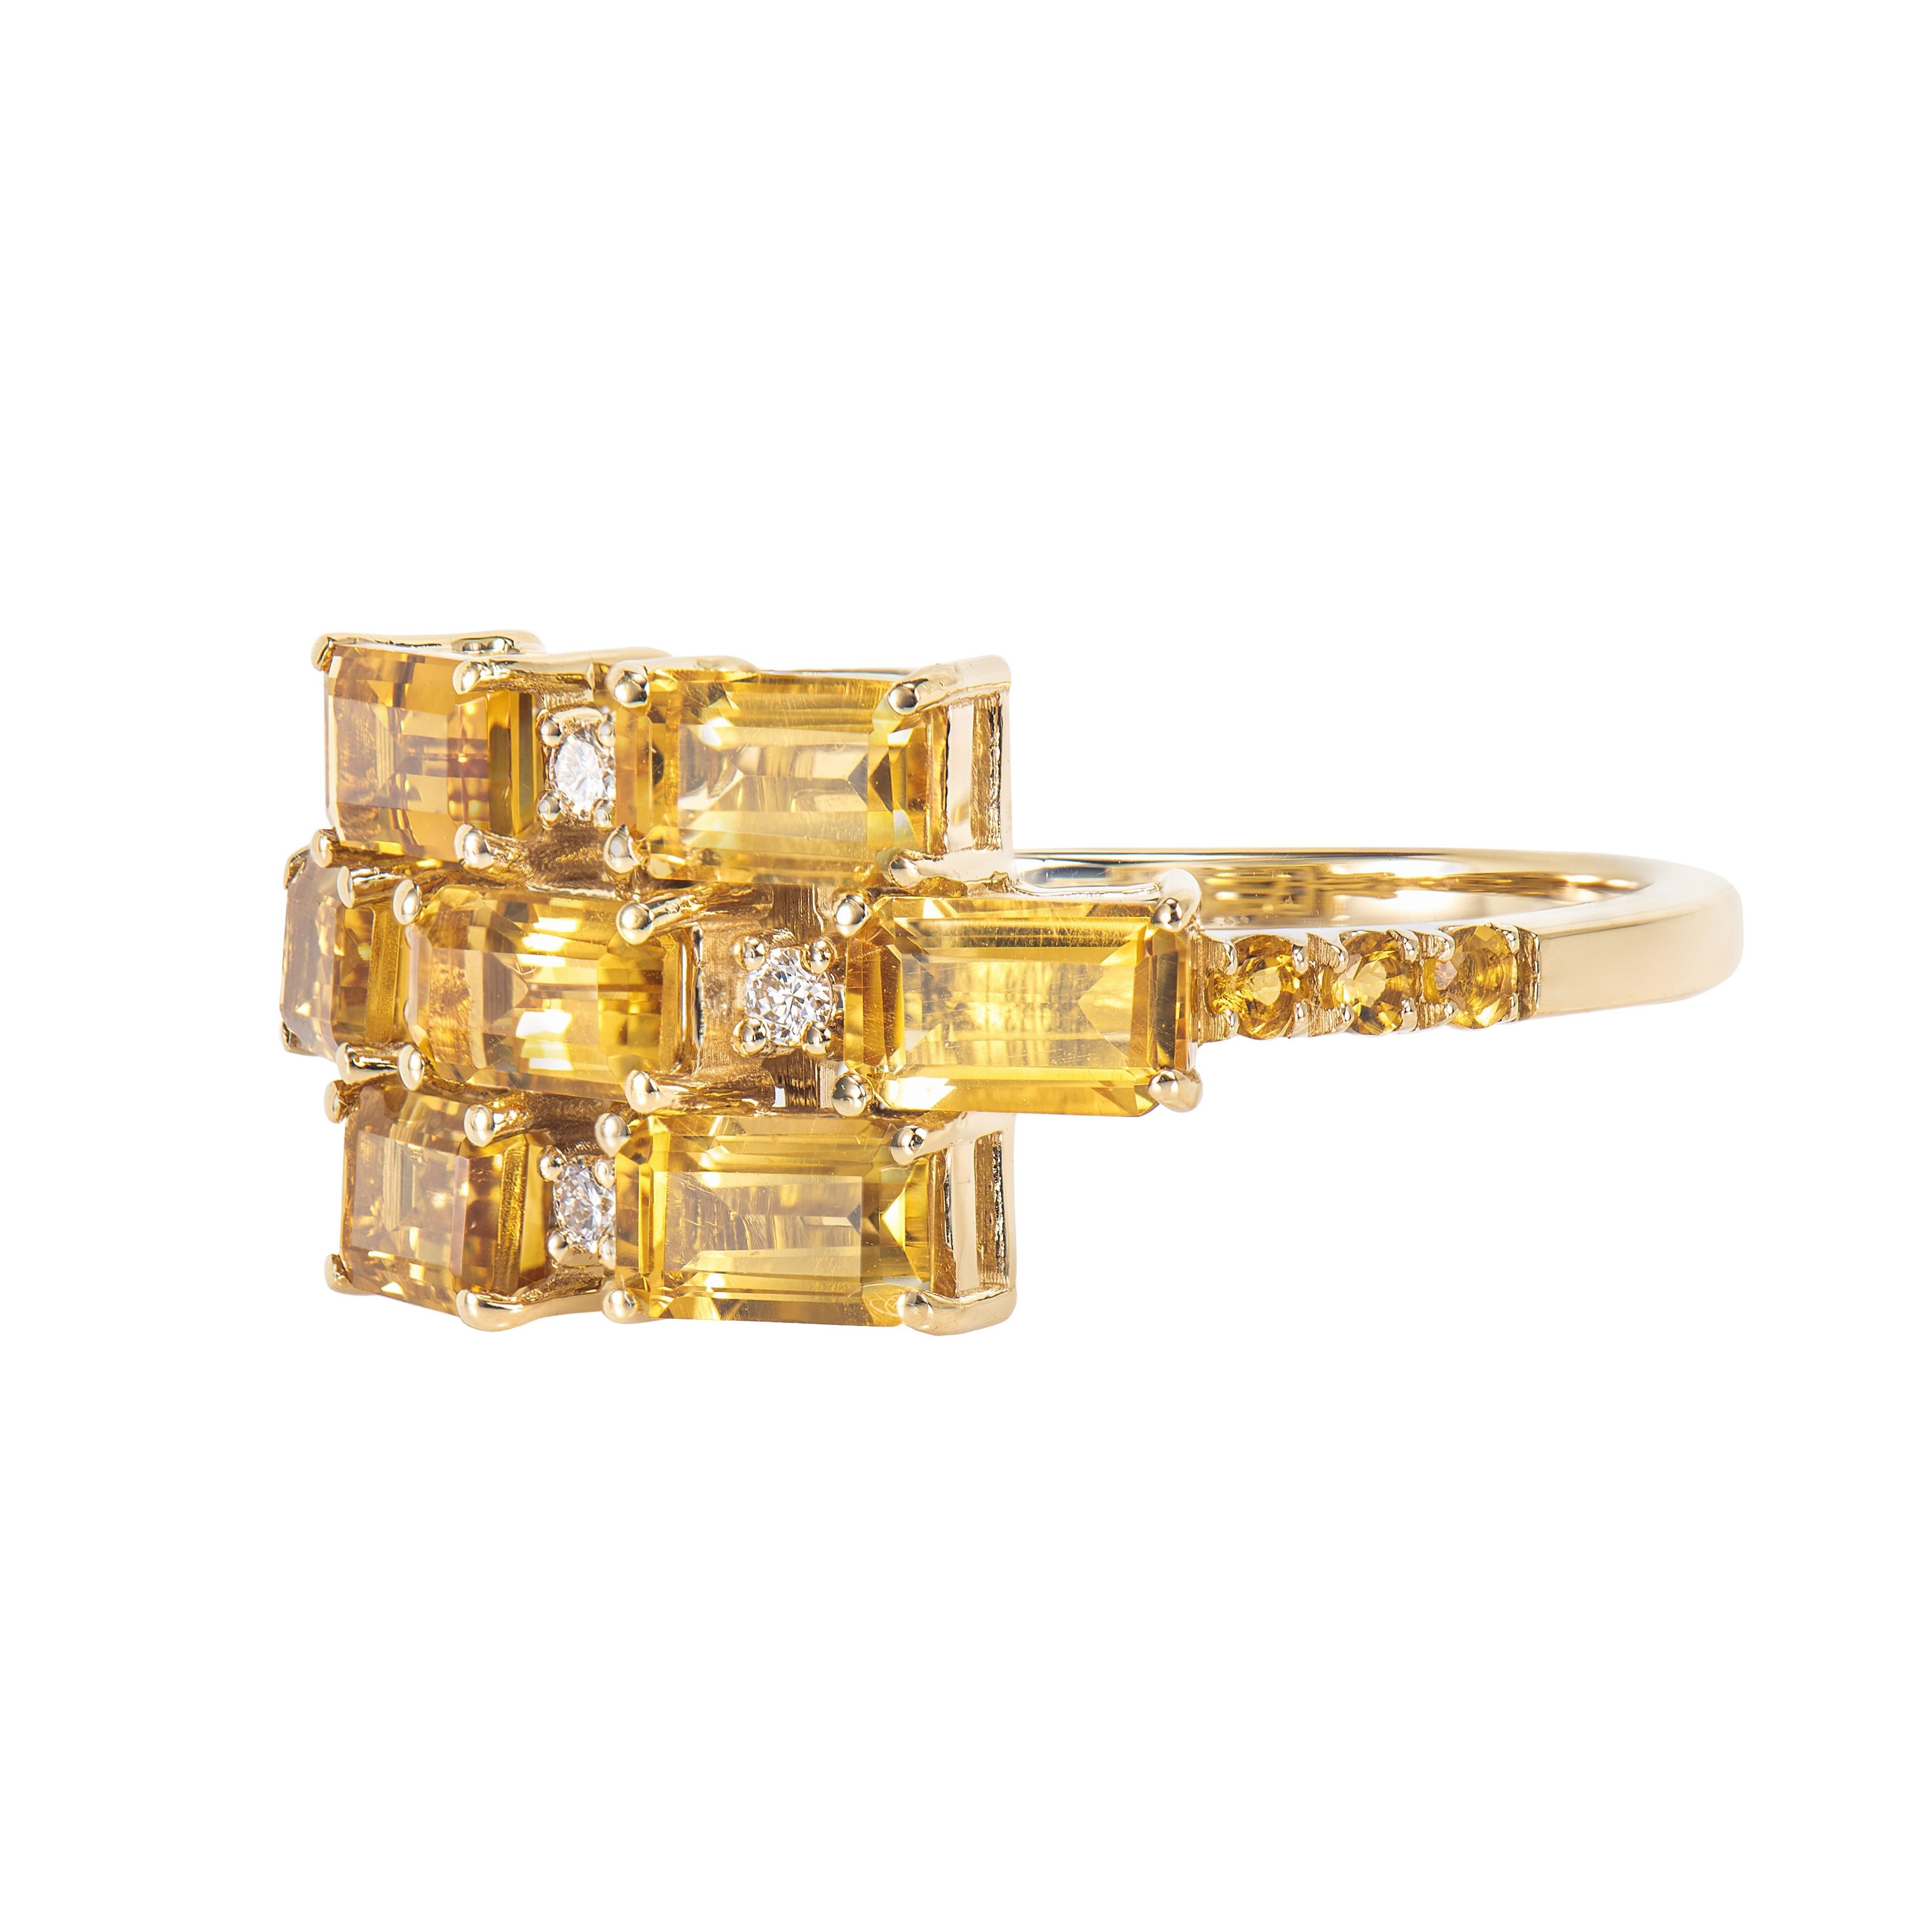 Octagon Cut 2.04 Carat Citrine Fancy Ring in 18Karat Yellow Gold with White Diamond.   For Sale